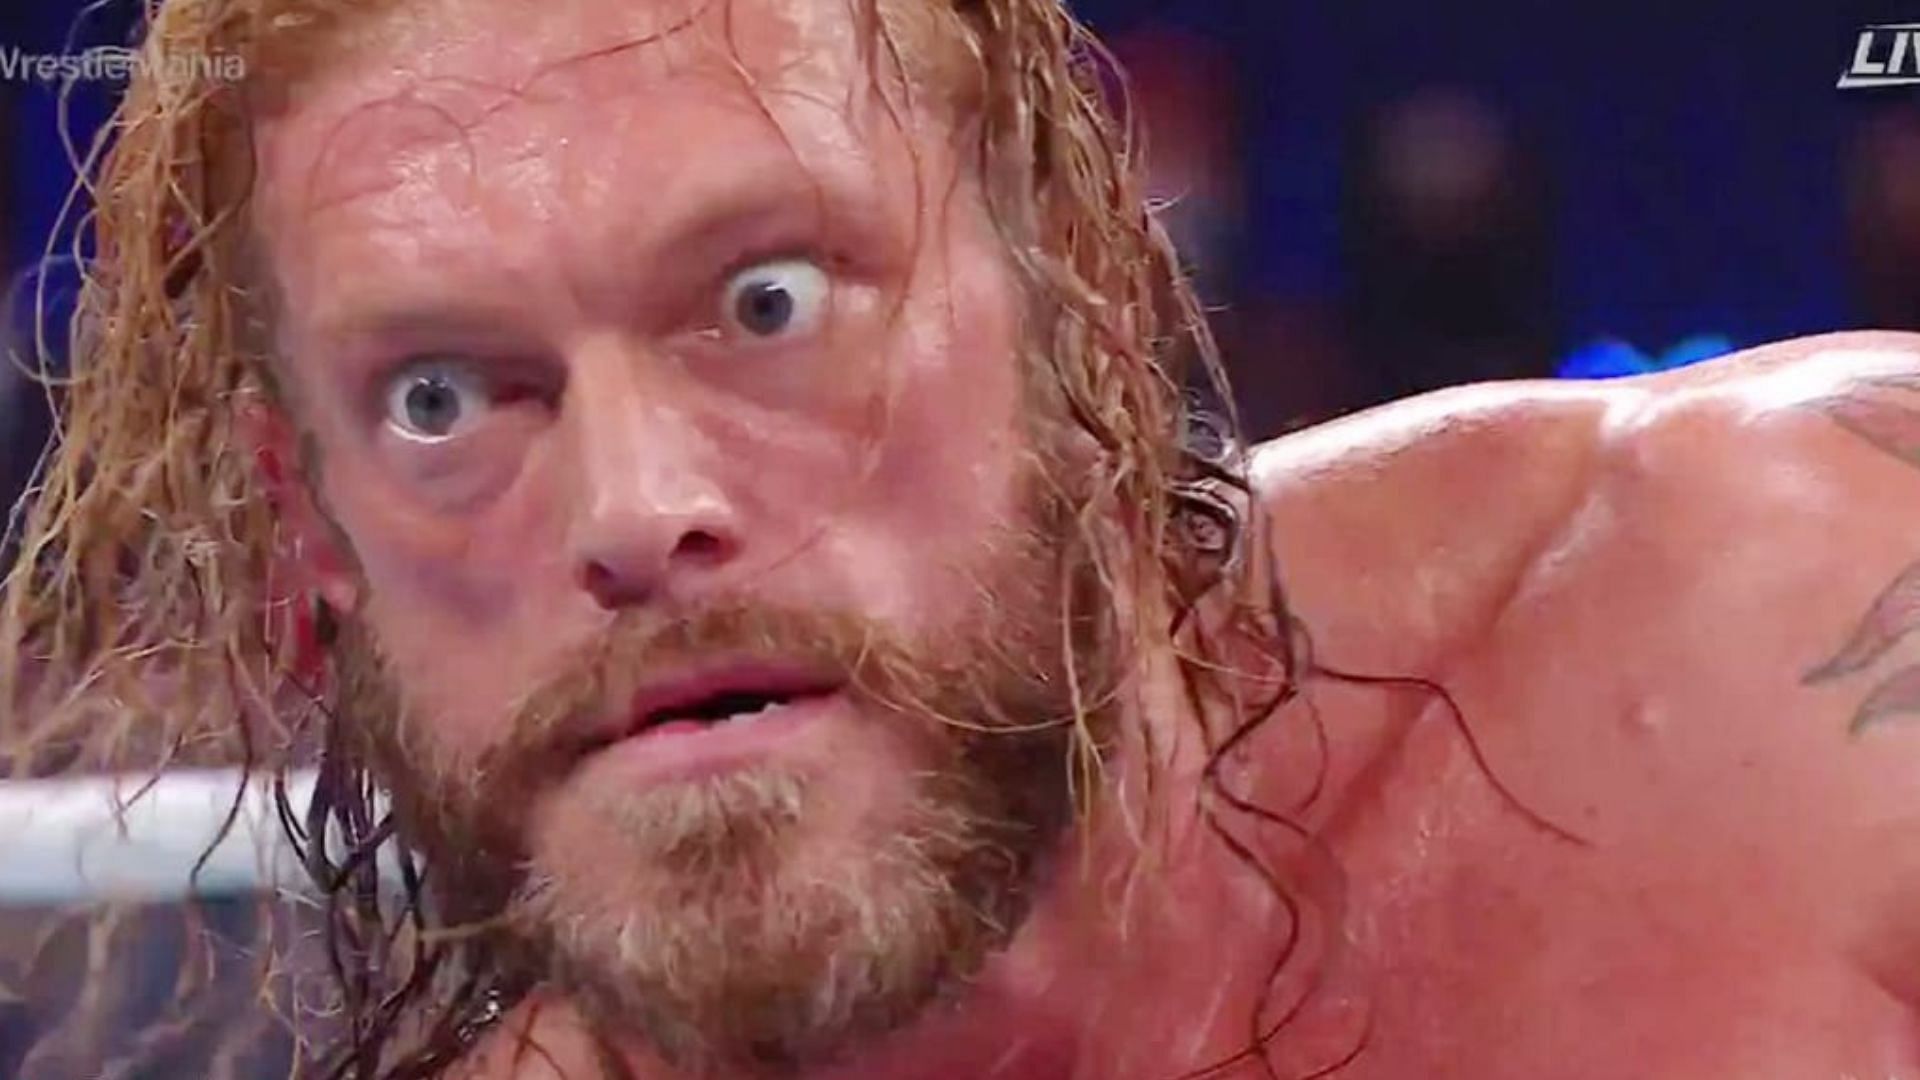 Edge recently lost to Finn Balor in an &quot;I Quit&quot; Match